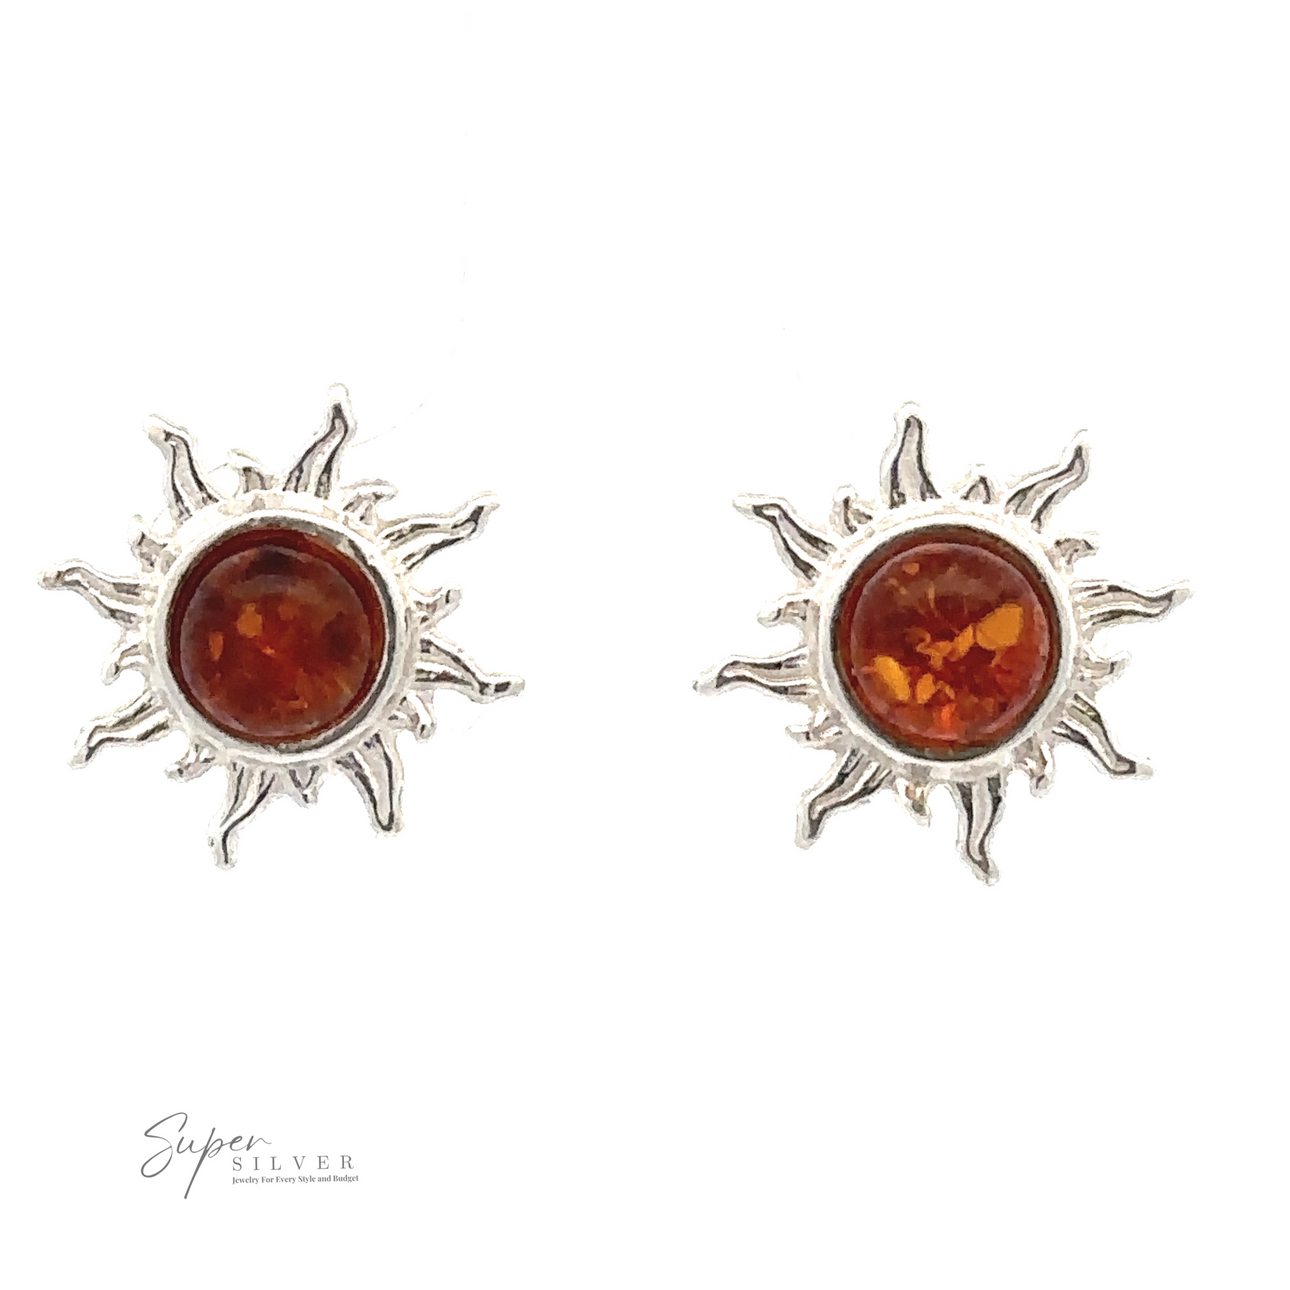 
                  
                    A pair of Brilliant Amber Sun Stud Earrings with amber-colored central gems crafted from Baltic amber set against a white background. The "Super Silver" logo graces the bottom left corner.

                  
                